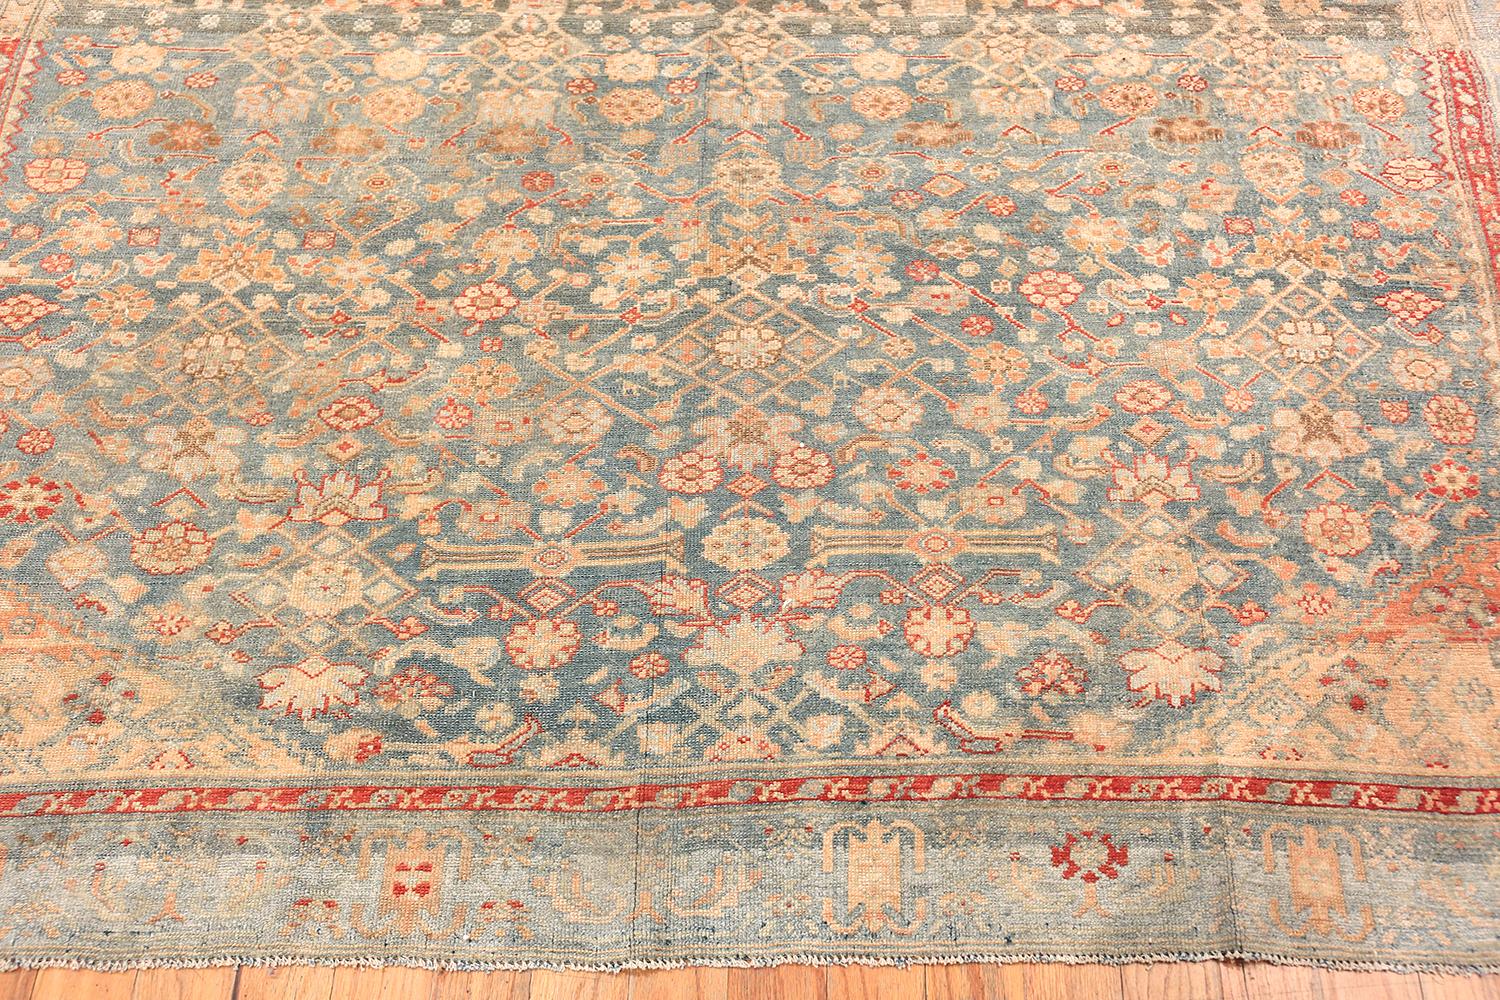 Decorative light blue antique Persian Malayer gallery size rug, country of origin / rug type: antique Persian rug - Size: 6 ft 8 in x 18 ft 7 in (2.03 m x 5.66 m). 

This magnificent antique gallery size Malayer rug features a gorgeous blue